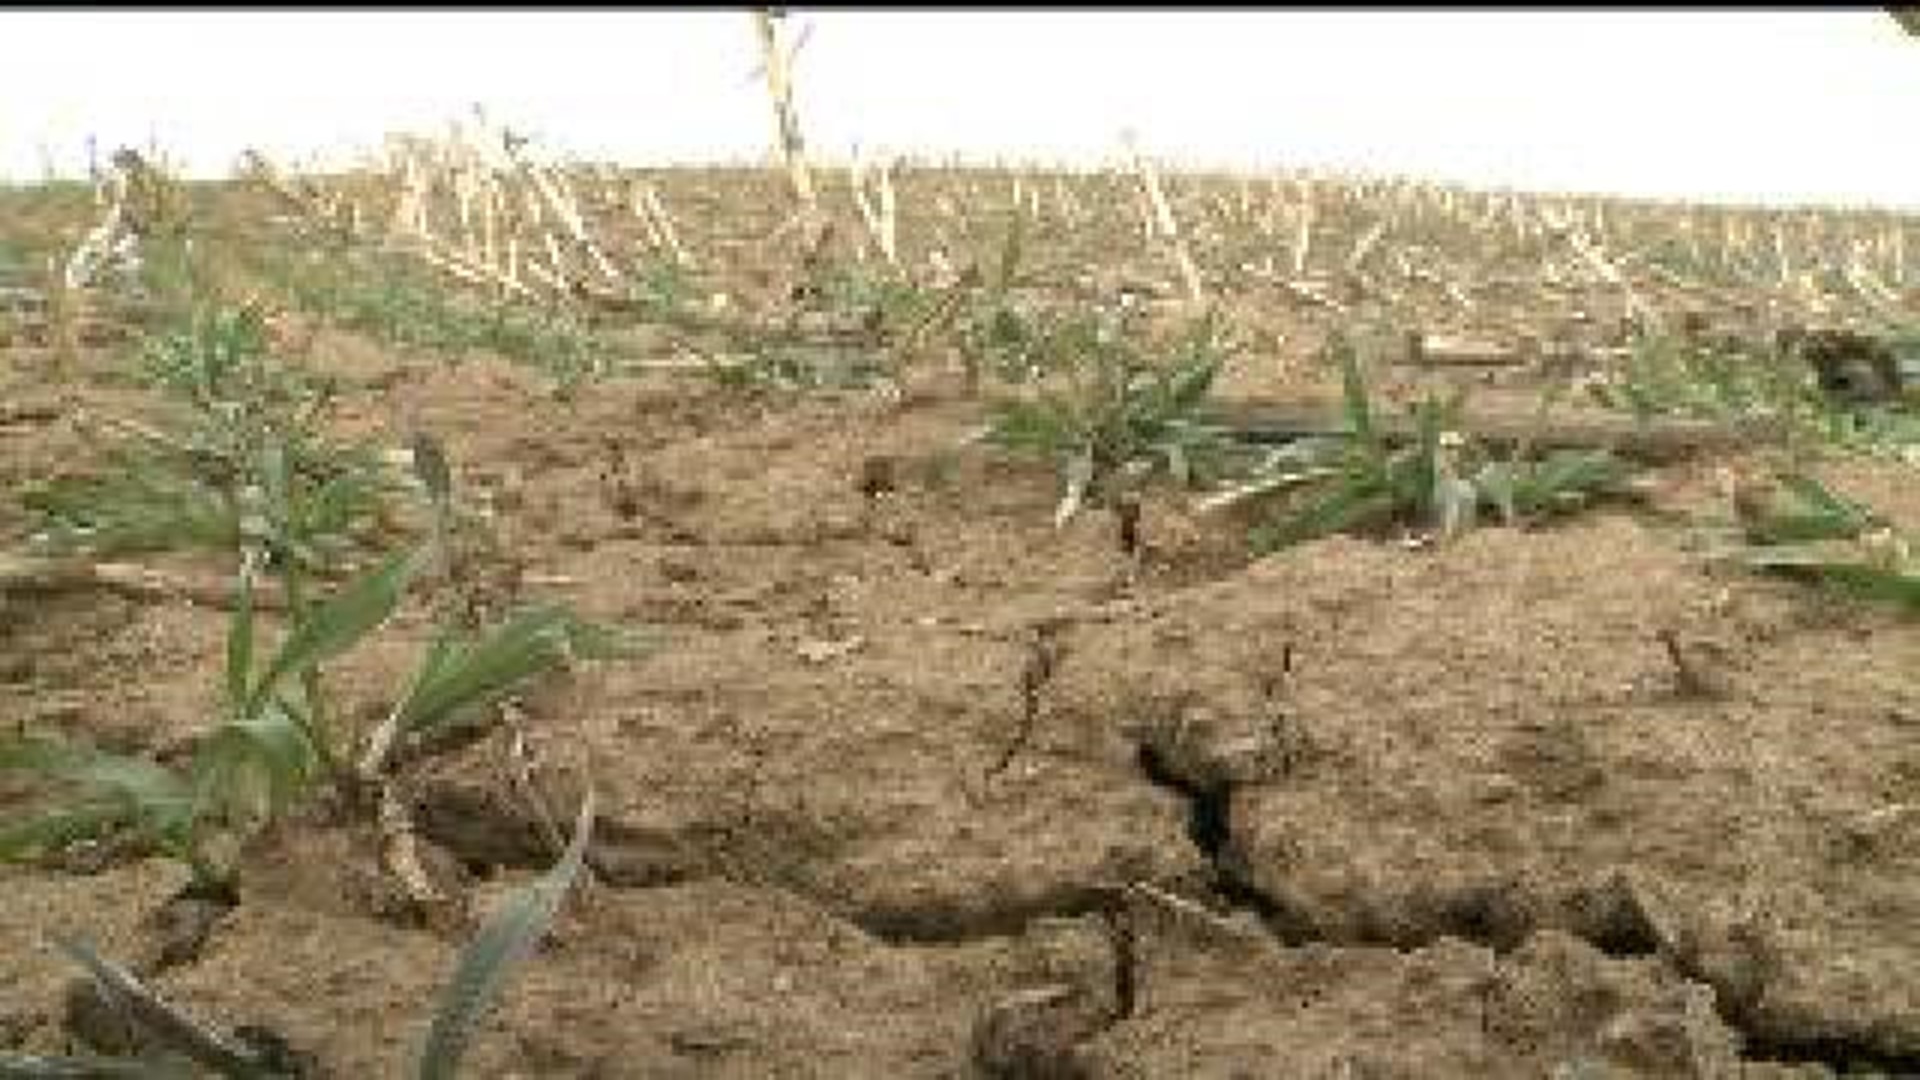 Farmers say fields are simultaneously too wet and too dry